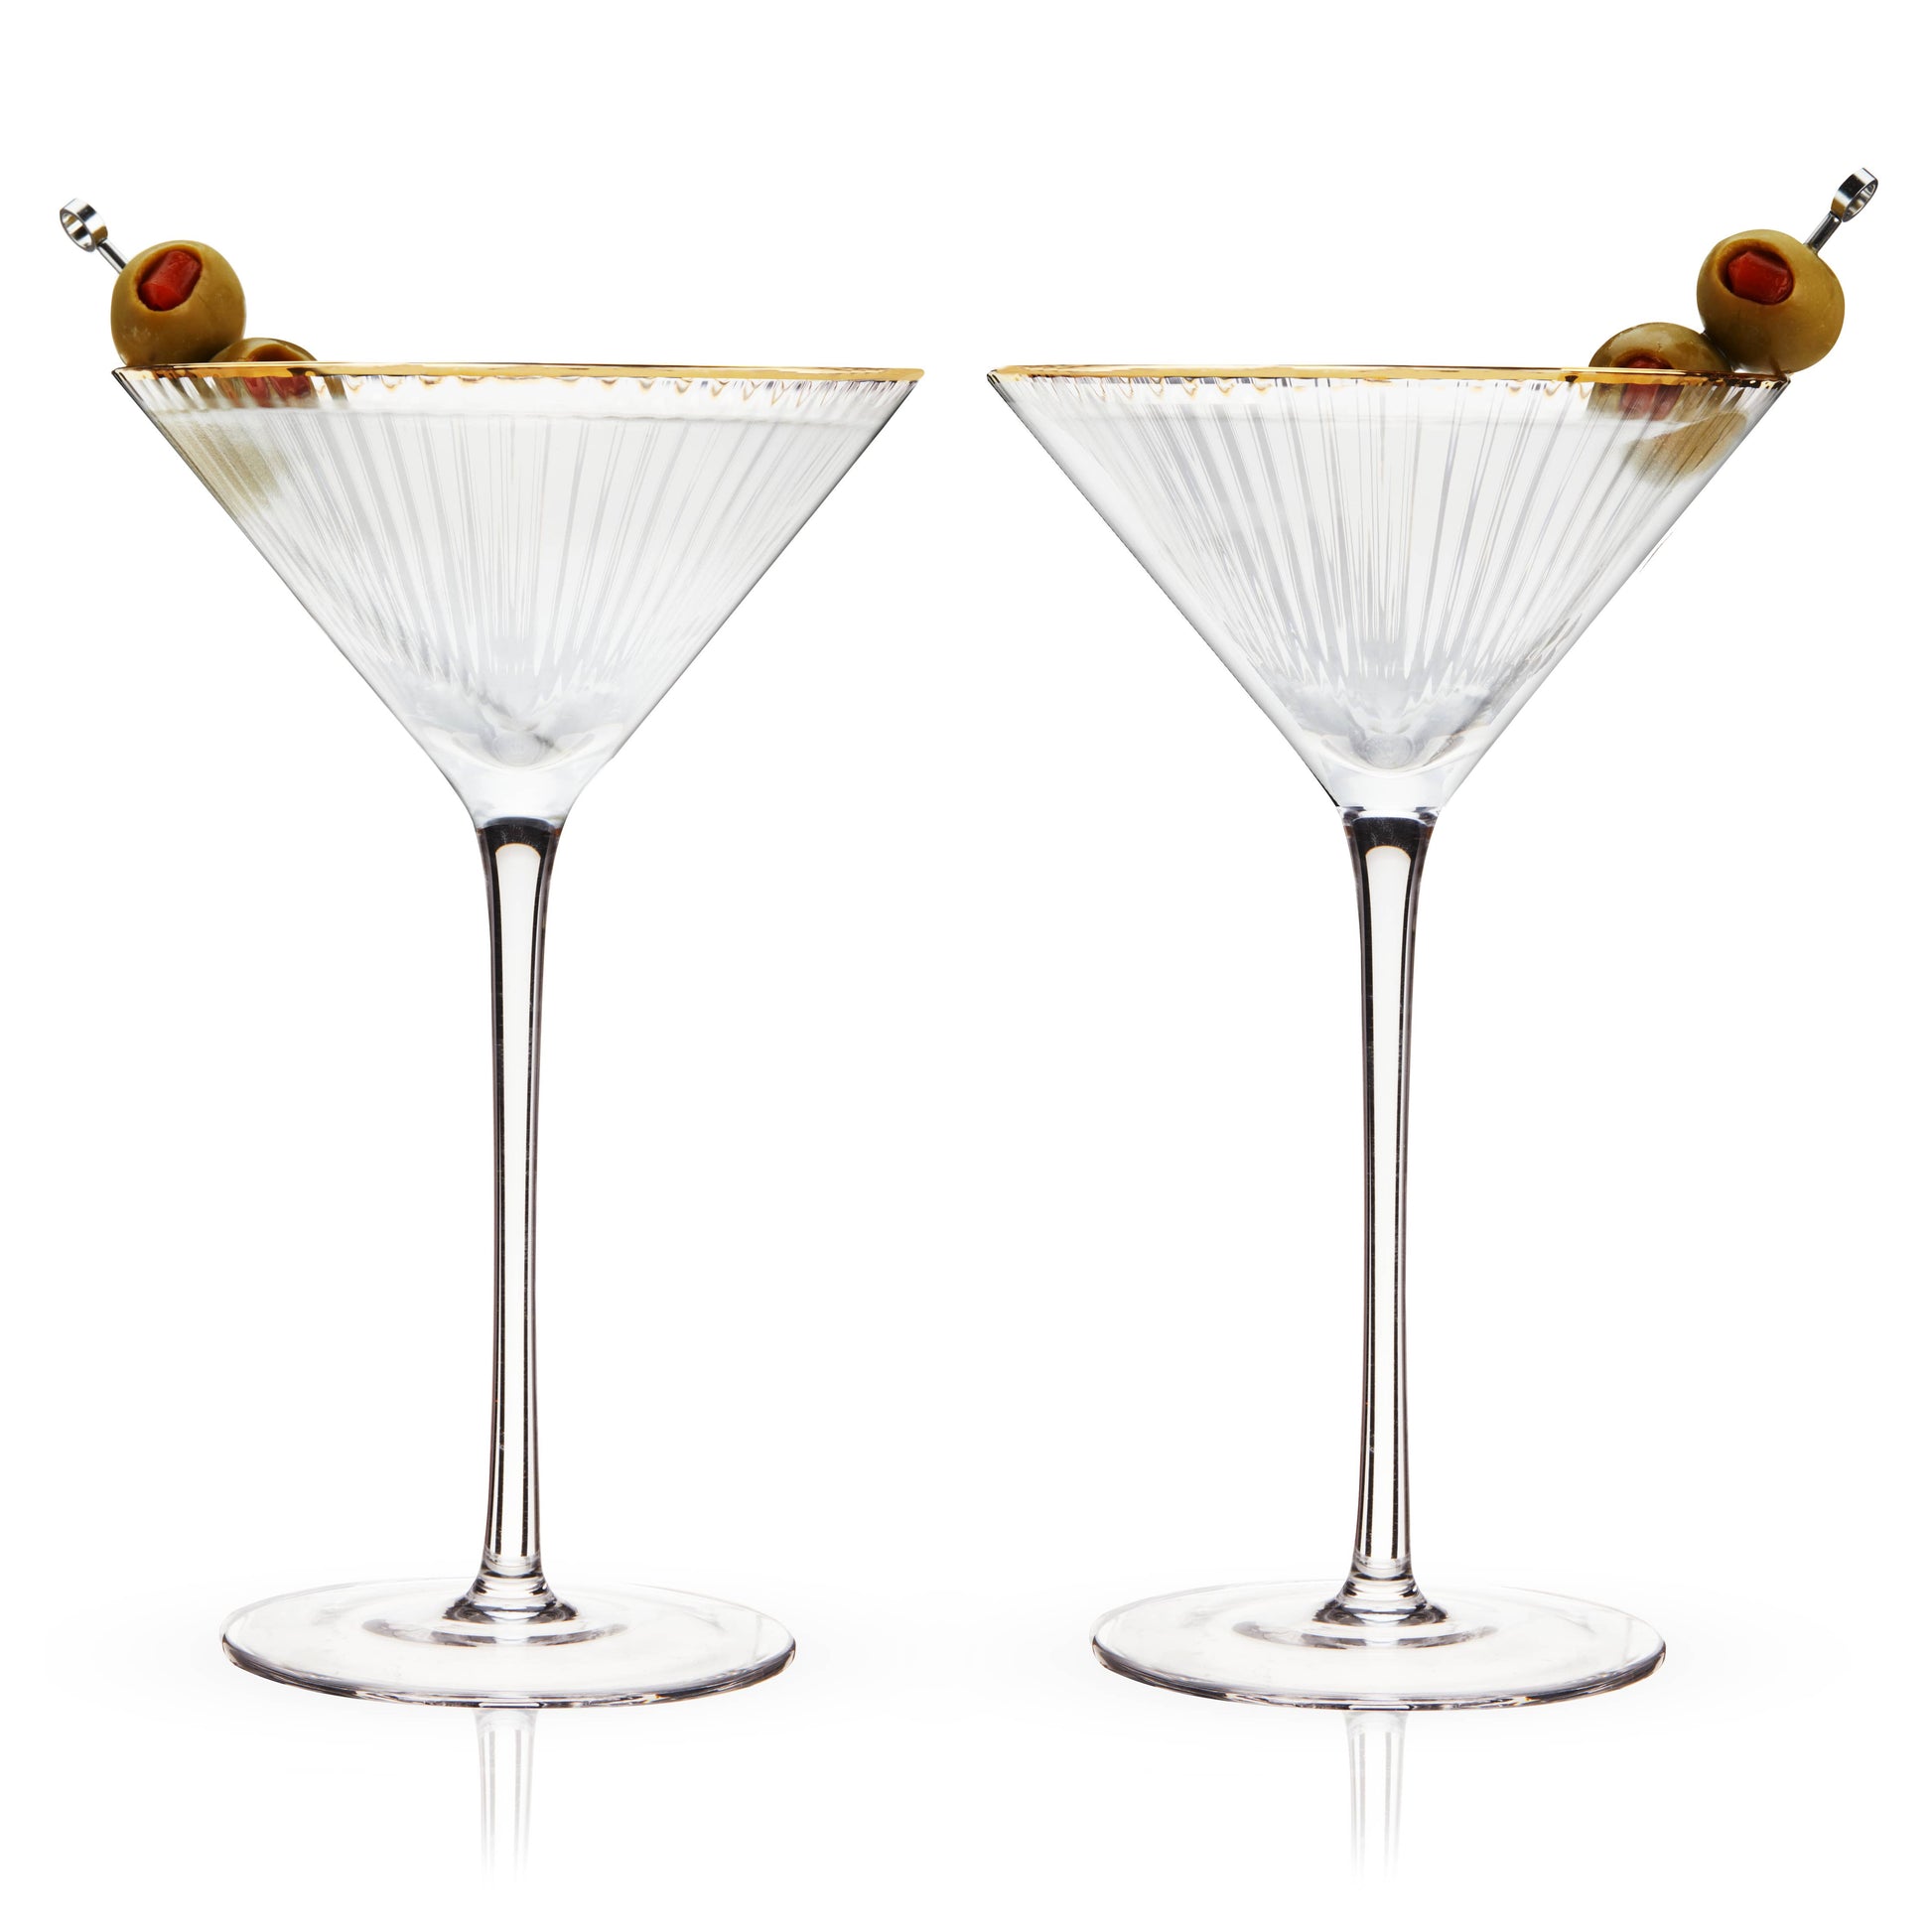 Photo of two rippled crystal martini glasses with gold dipped rims. Portrayed with green martini olives speared on silver cocktail picks resting inside the glasses.. Background is white.